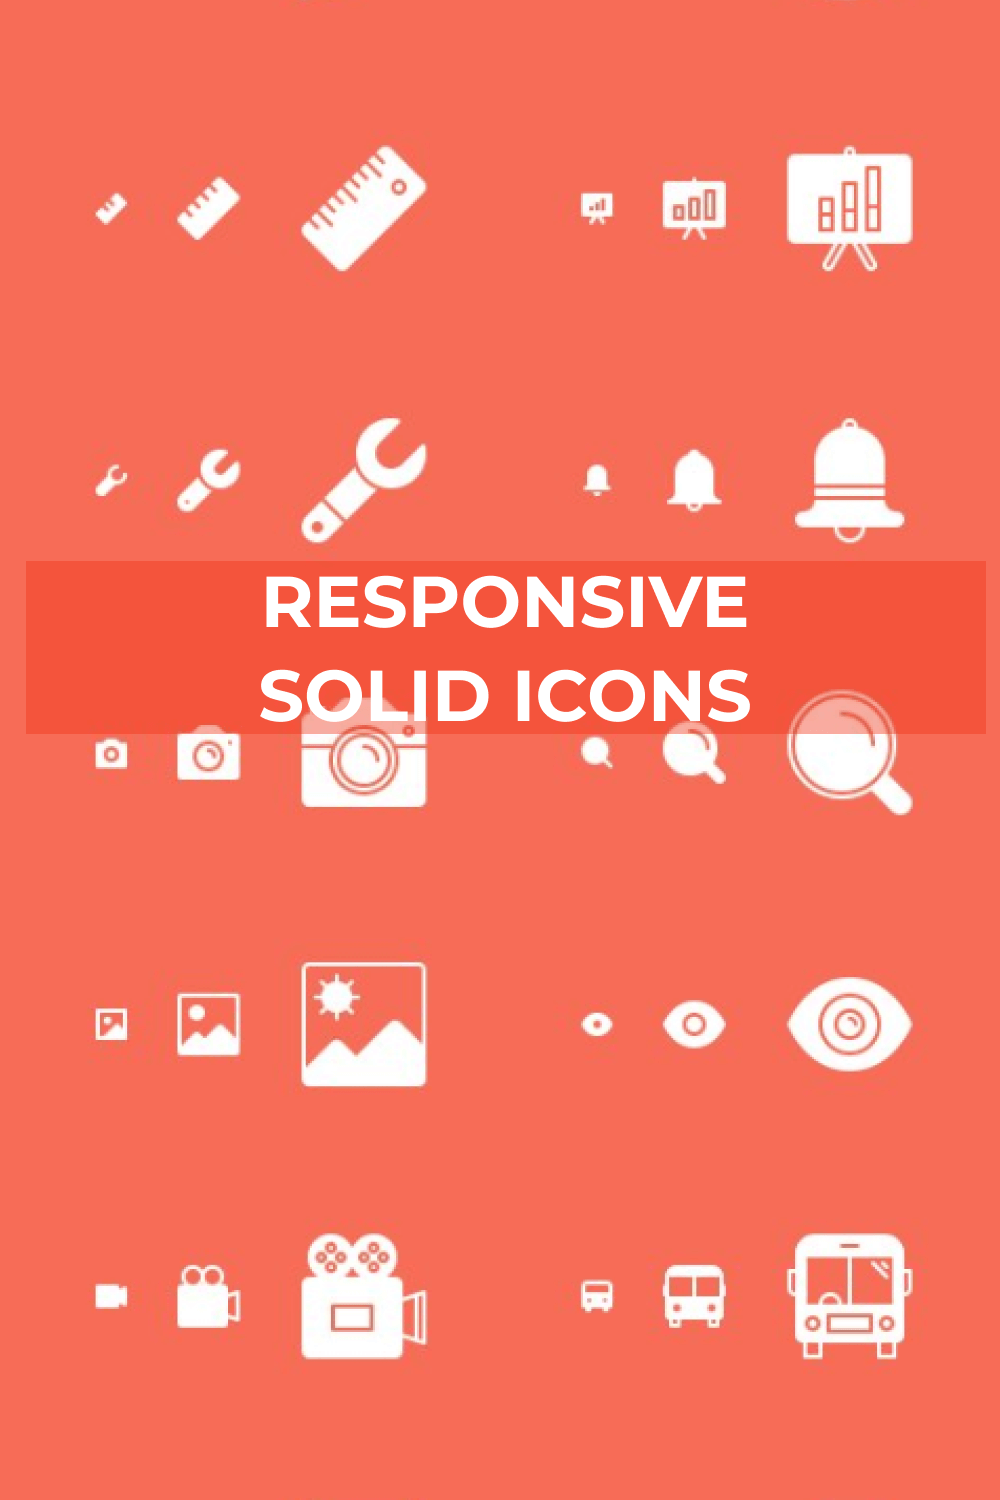 Icons are responsive and mobile friendly.